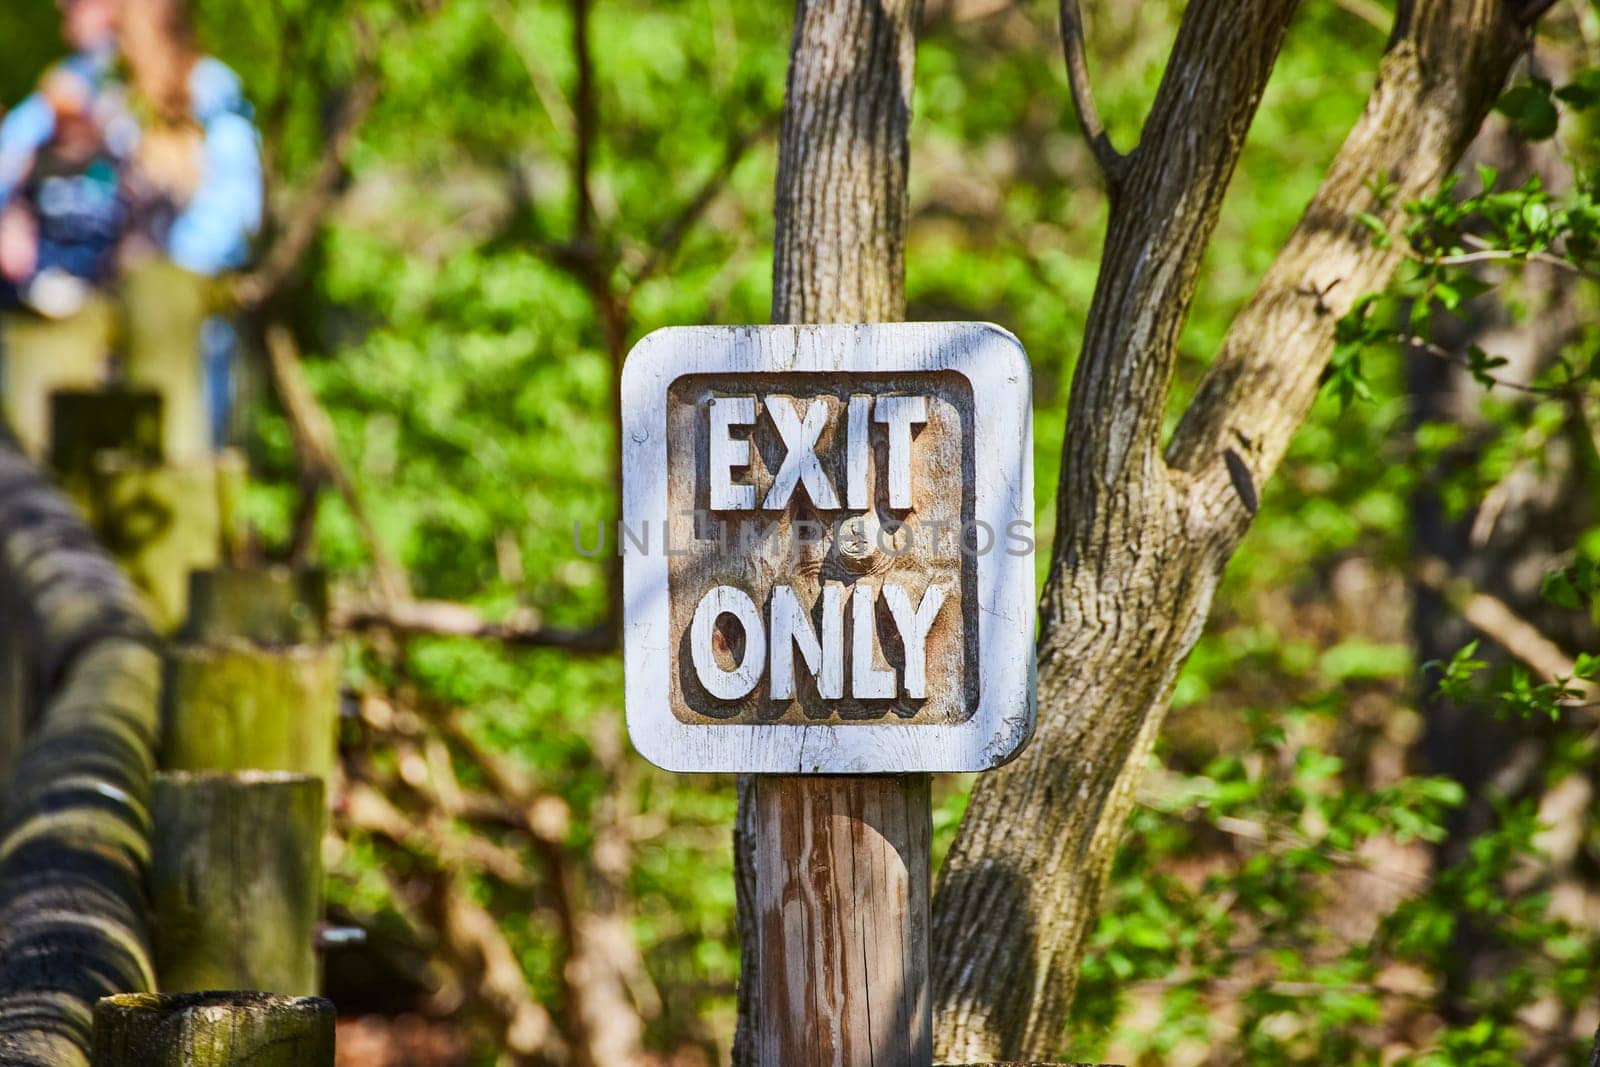 Rustic 'EXIT ONLY' sign on a wooden post in lush Fort Wayne Children's Zoo, guiding visitors gently.